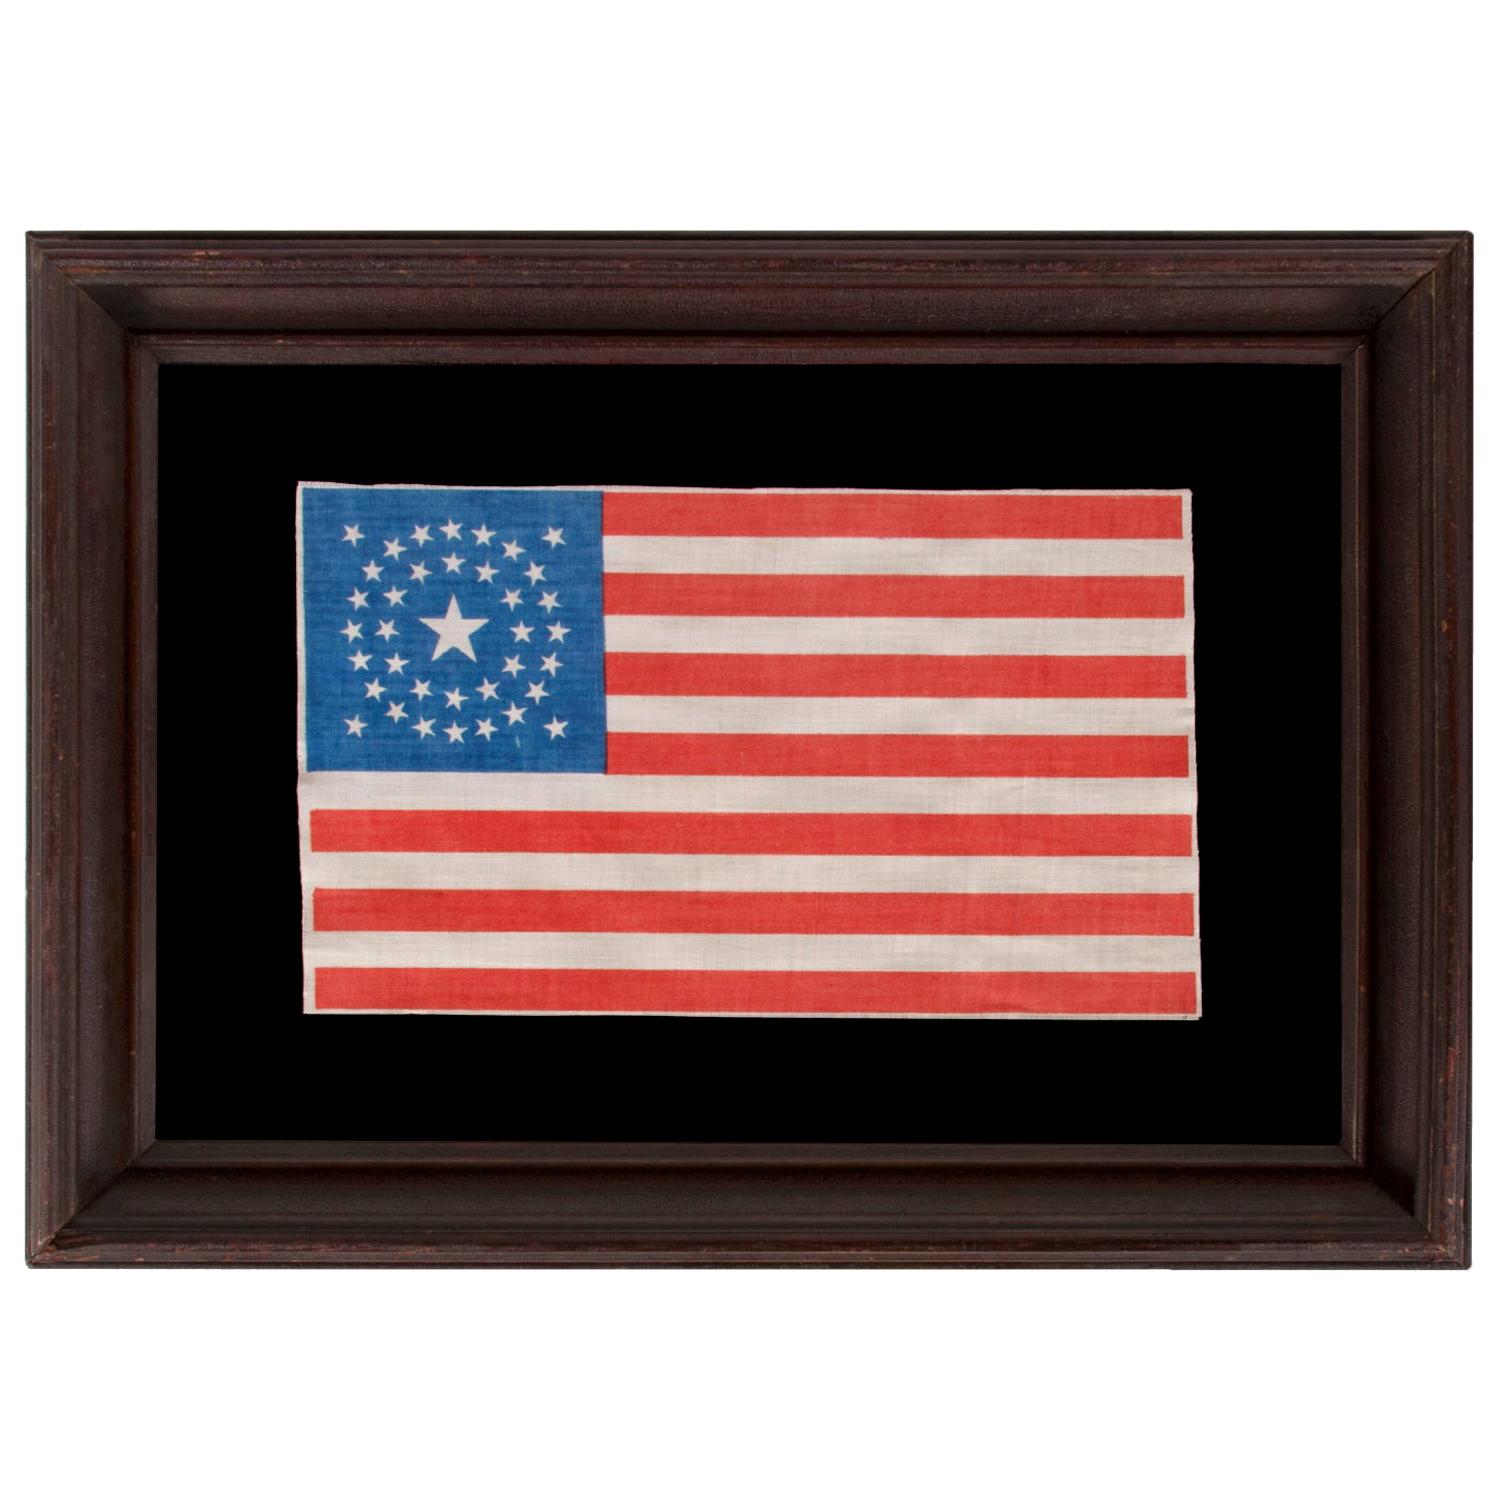 37 Star Antique American Flag with Stars in a Double-Wreath Pattern, 1867-1876